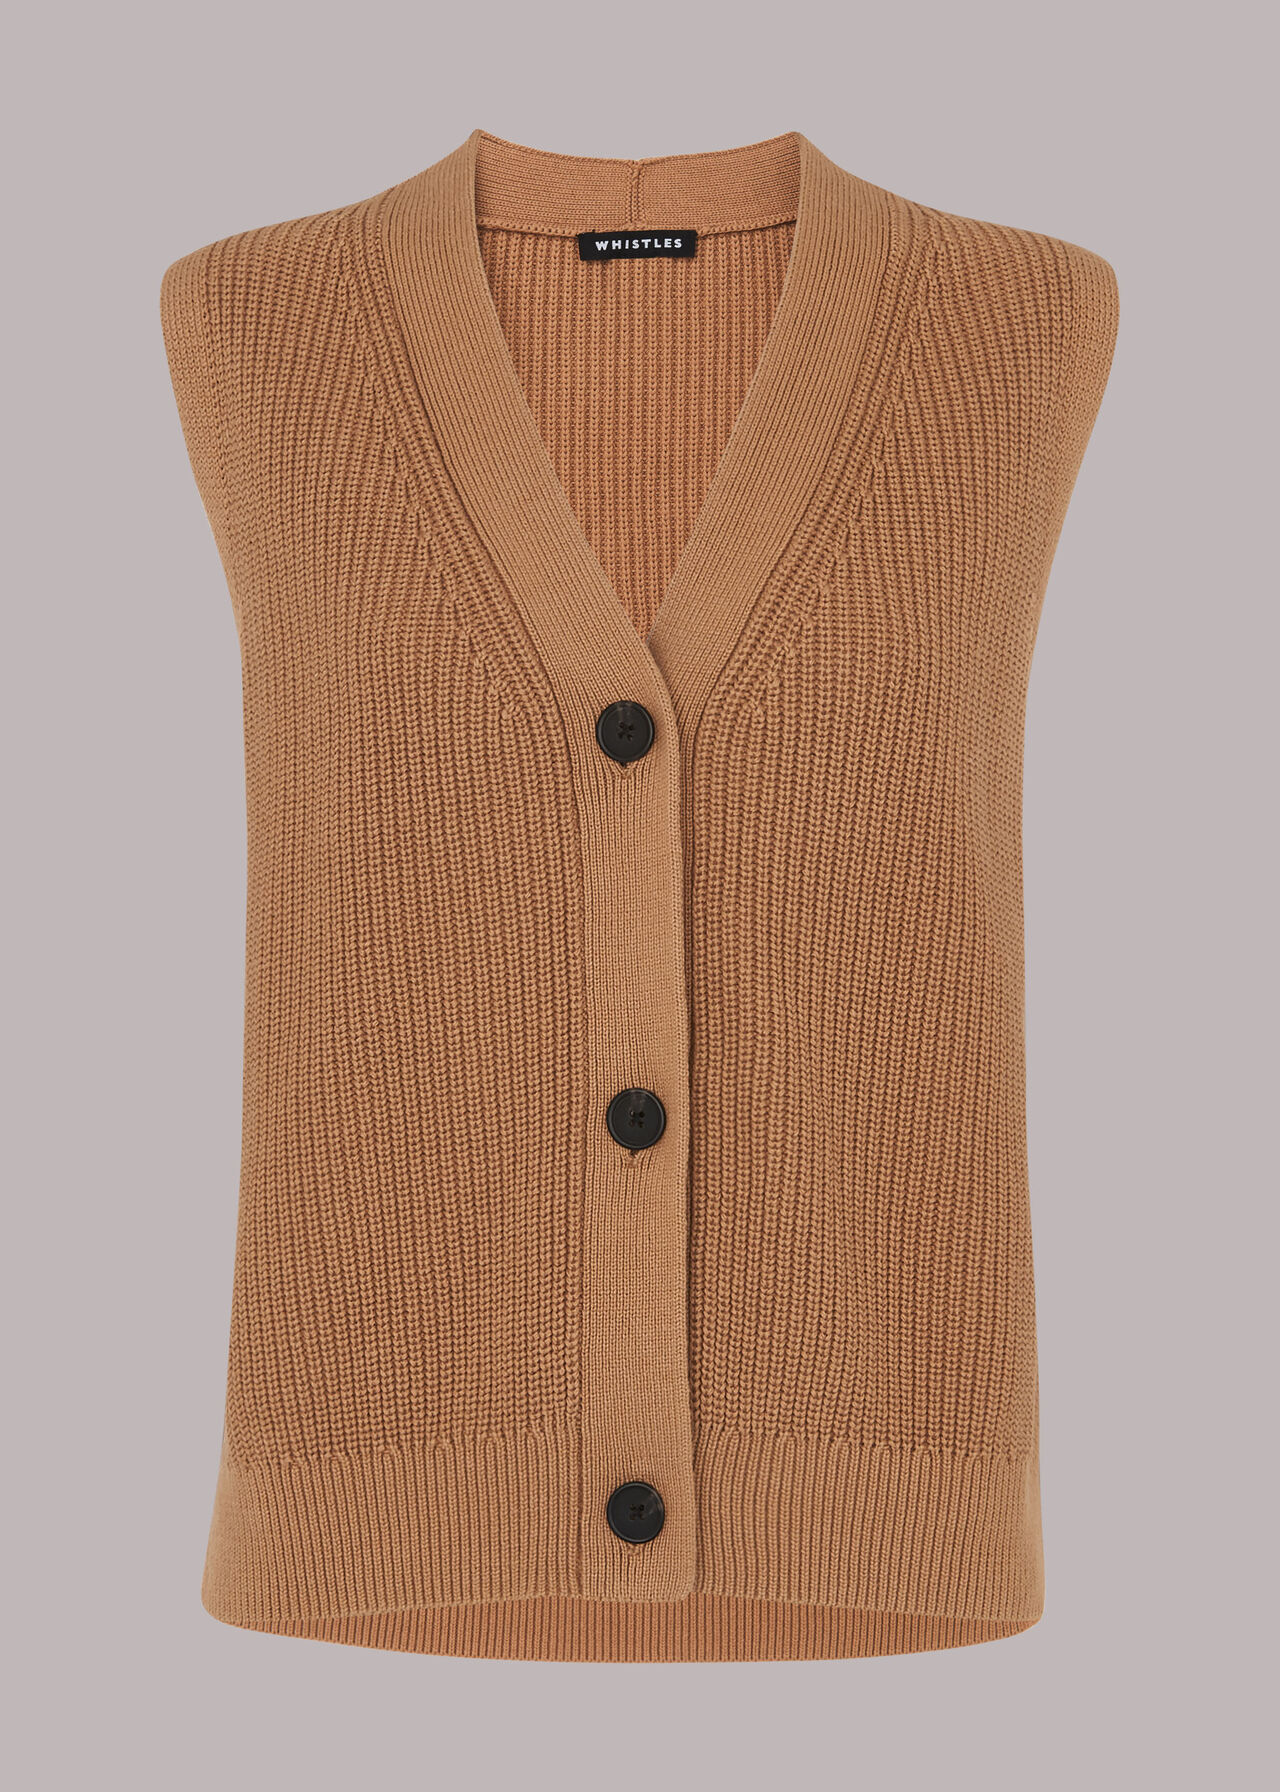 Knitted Button Up Waistcoat